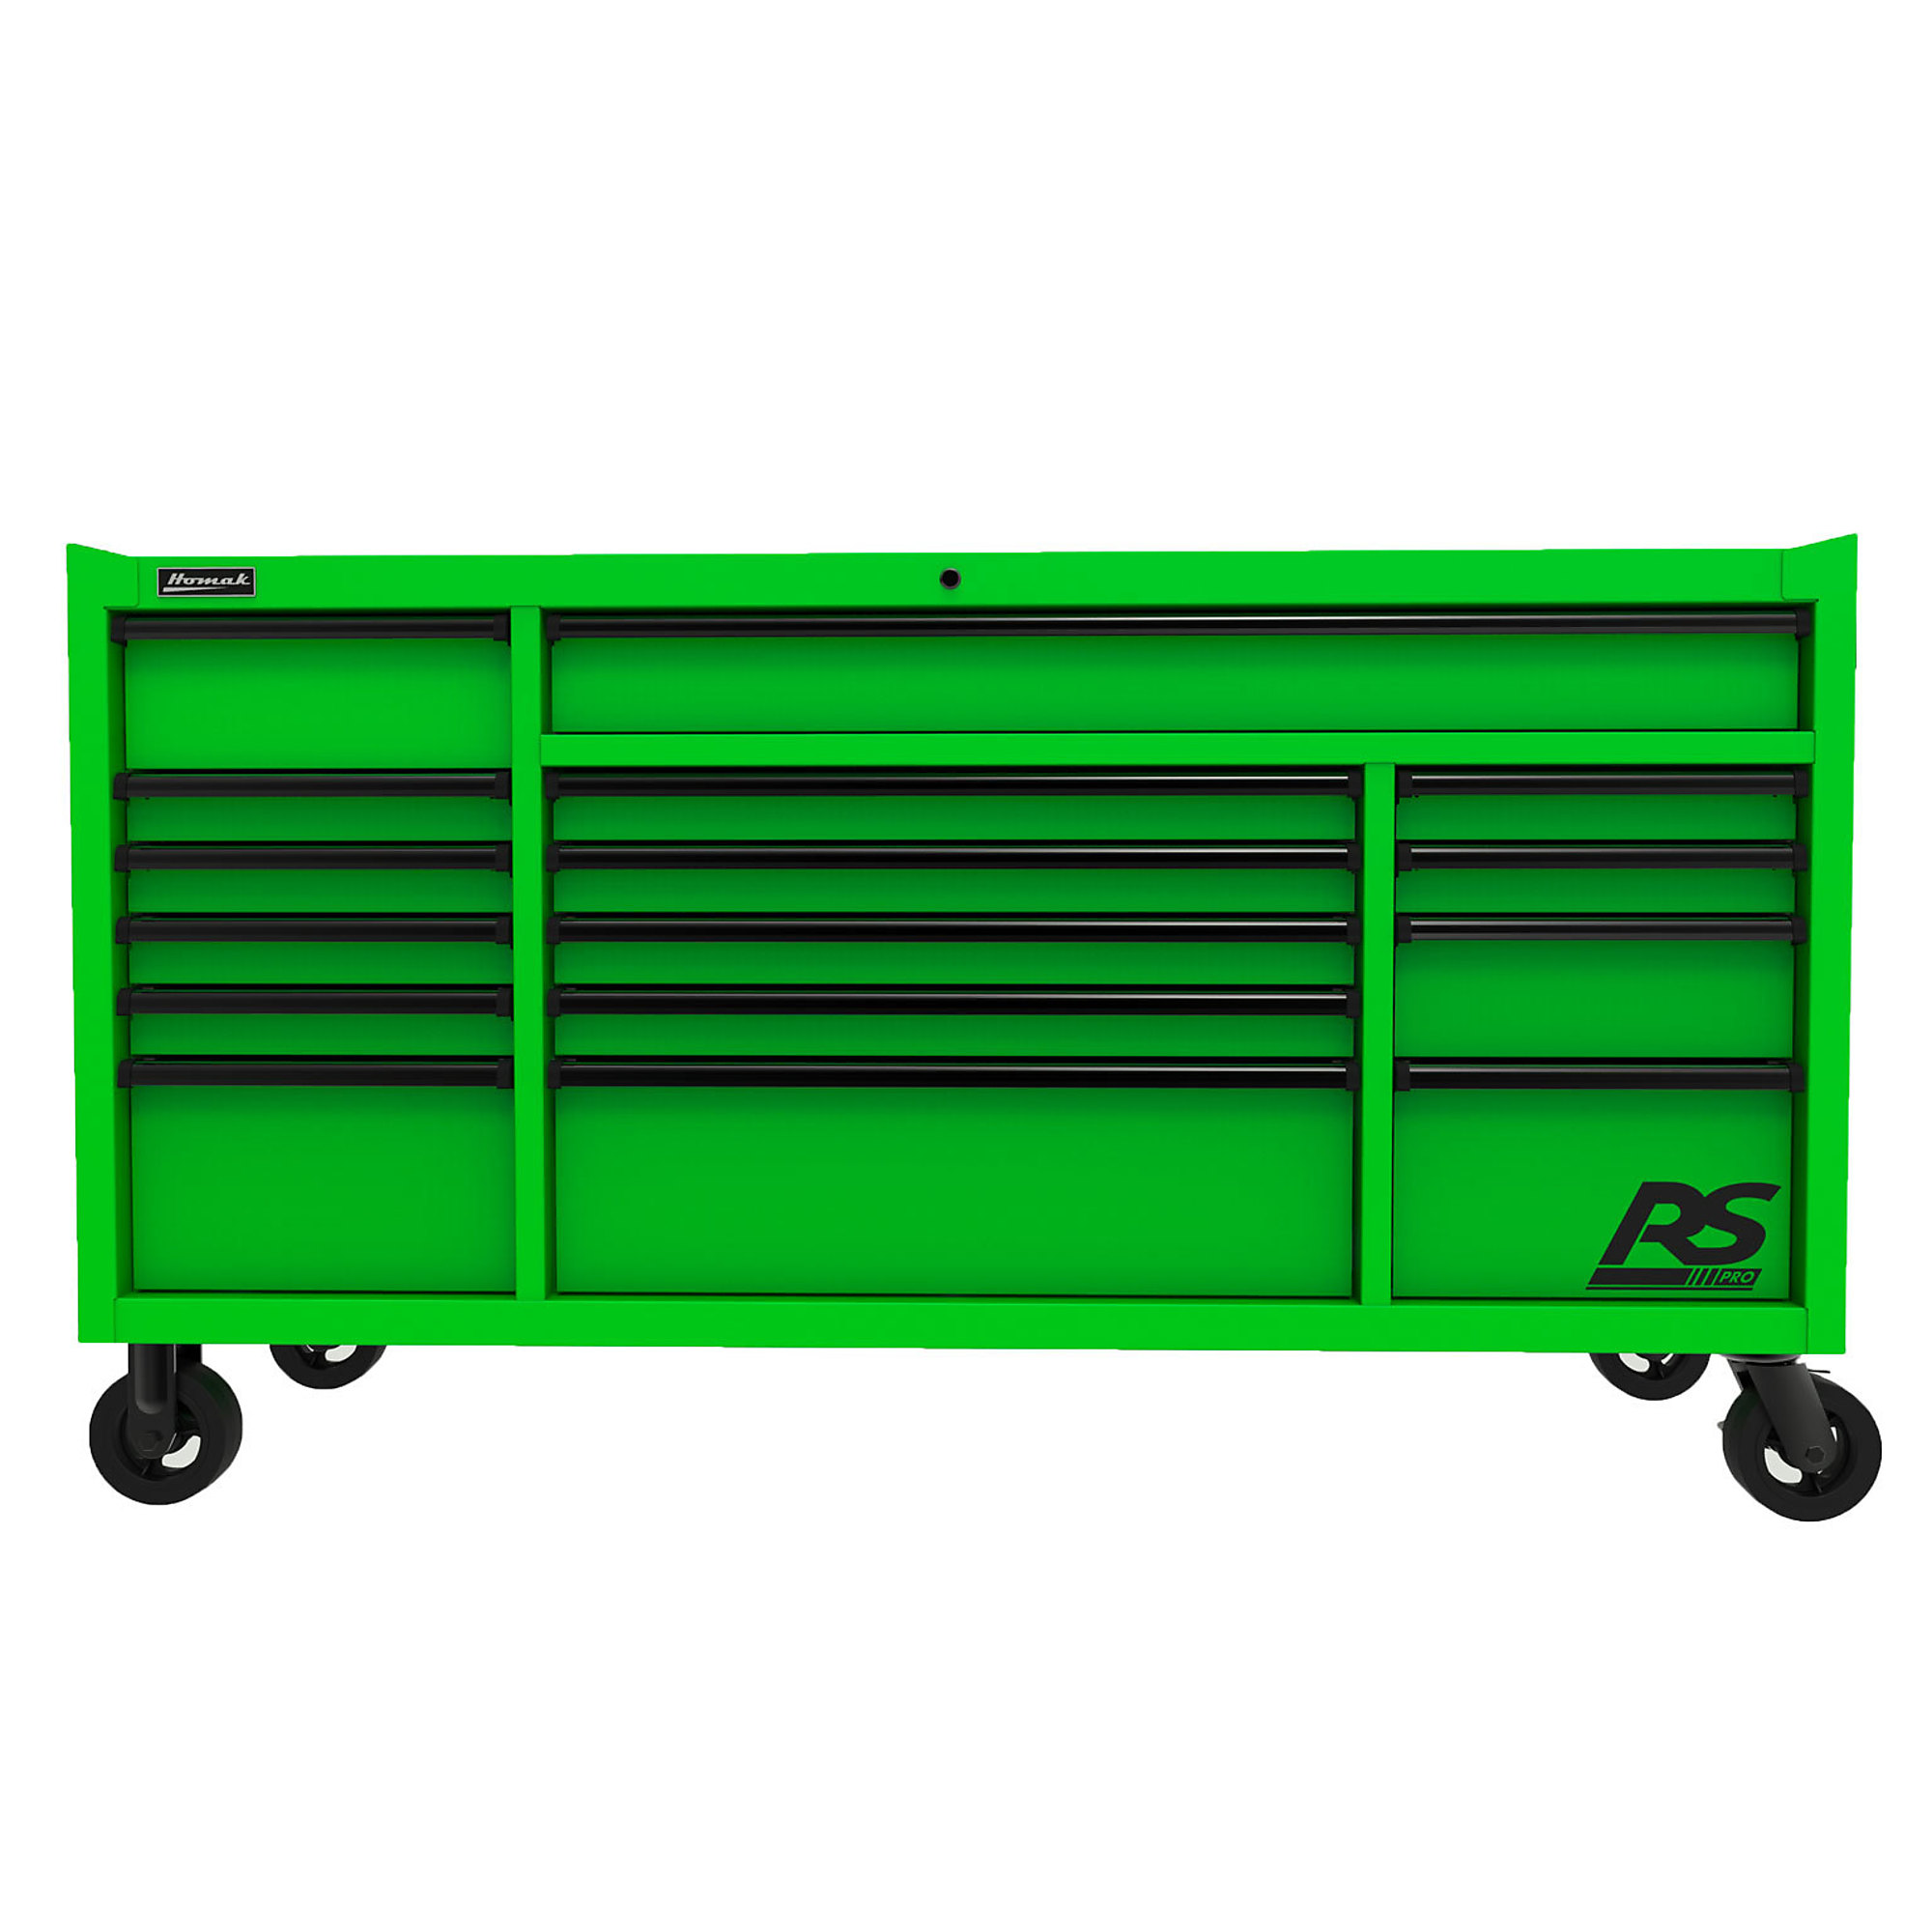 Homak RS Pro, 72Inch RS PRO 16 DWR ROLLER CABINET-LIME GREEN, Width 39 in, Height 72 in, Color Green, Model LG04072160